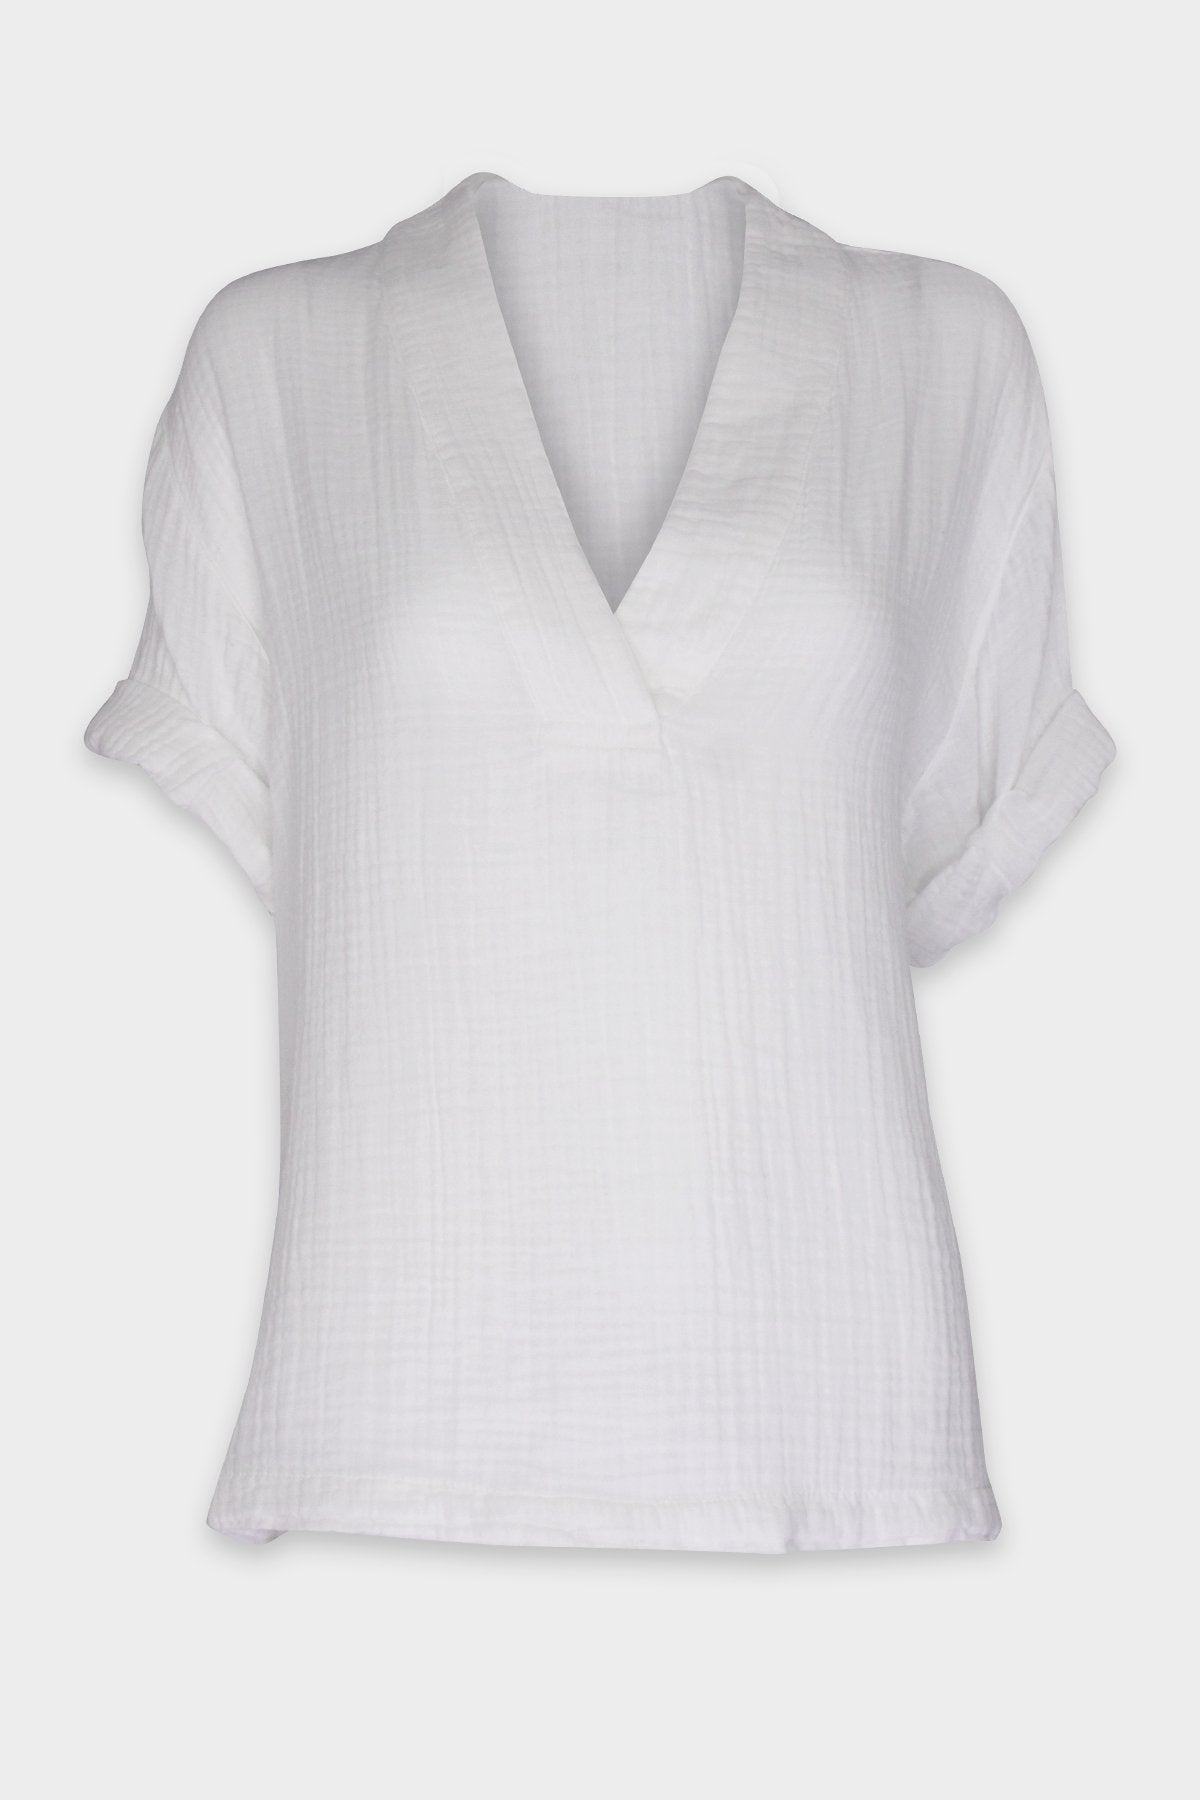 Avery Top in White - shop-olivia.com